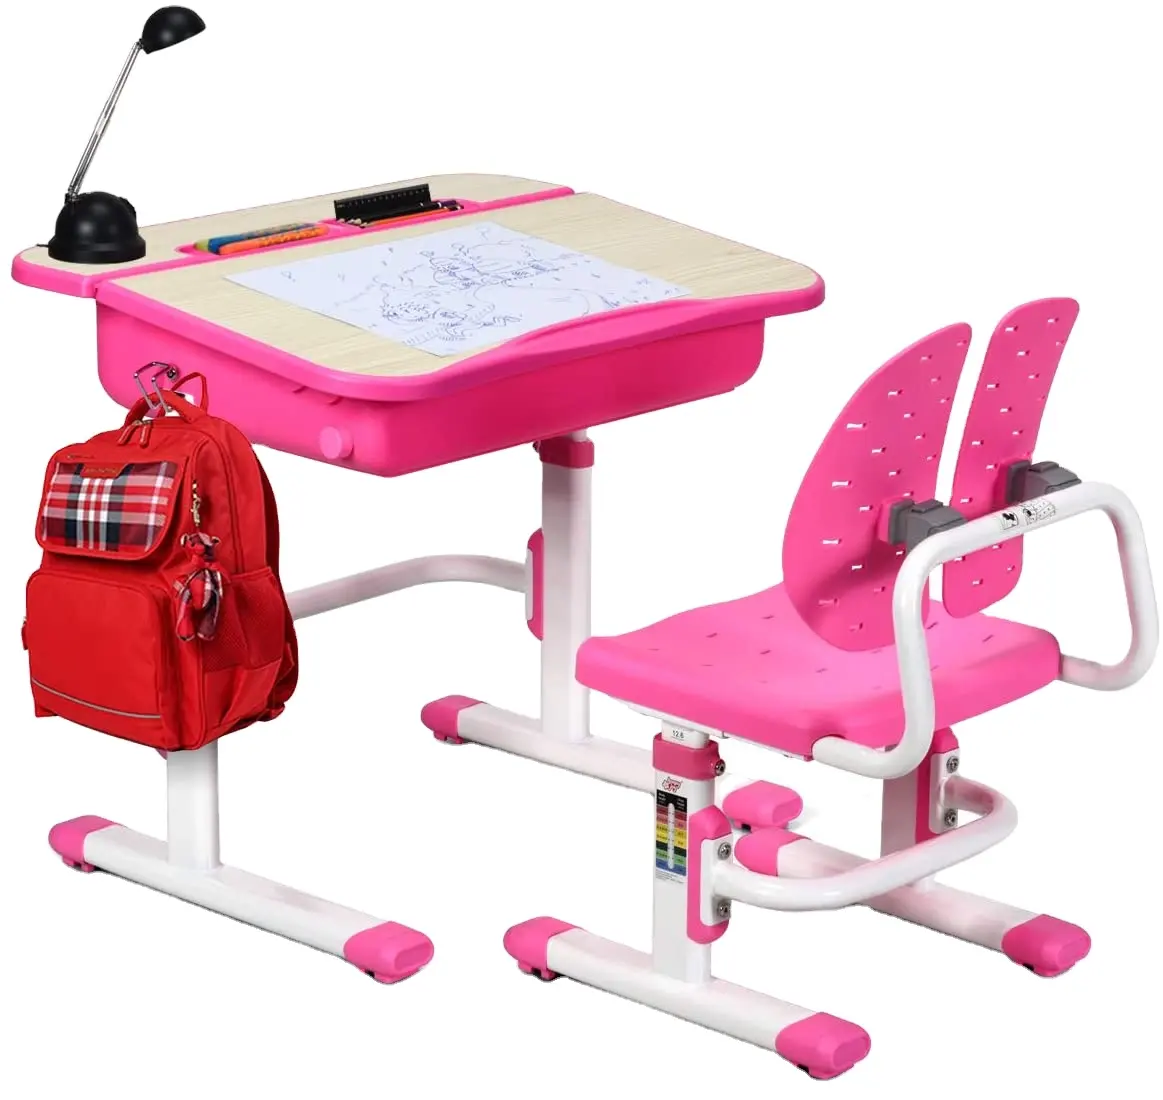 Ergonomic Winged Backrest Kids Desk And Chair Set Height Adjustable Children's Study Table With Large Storage Space